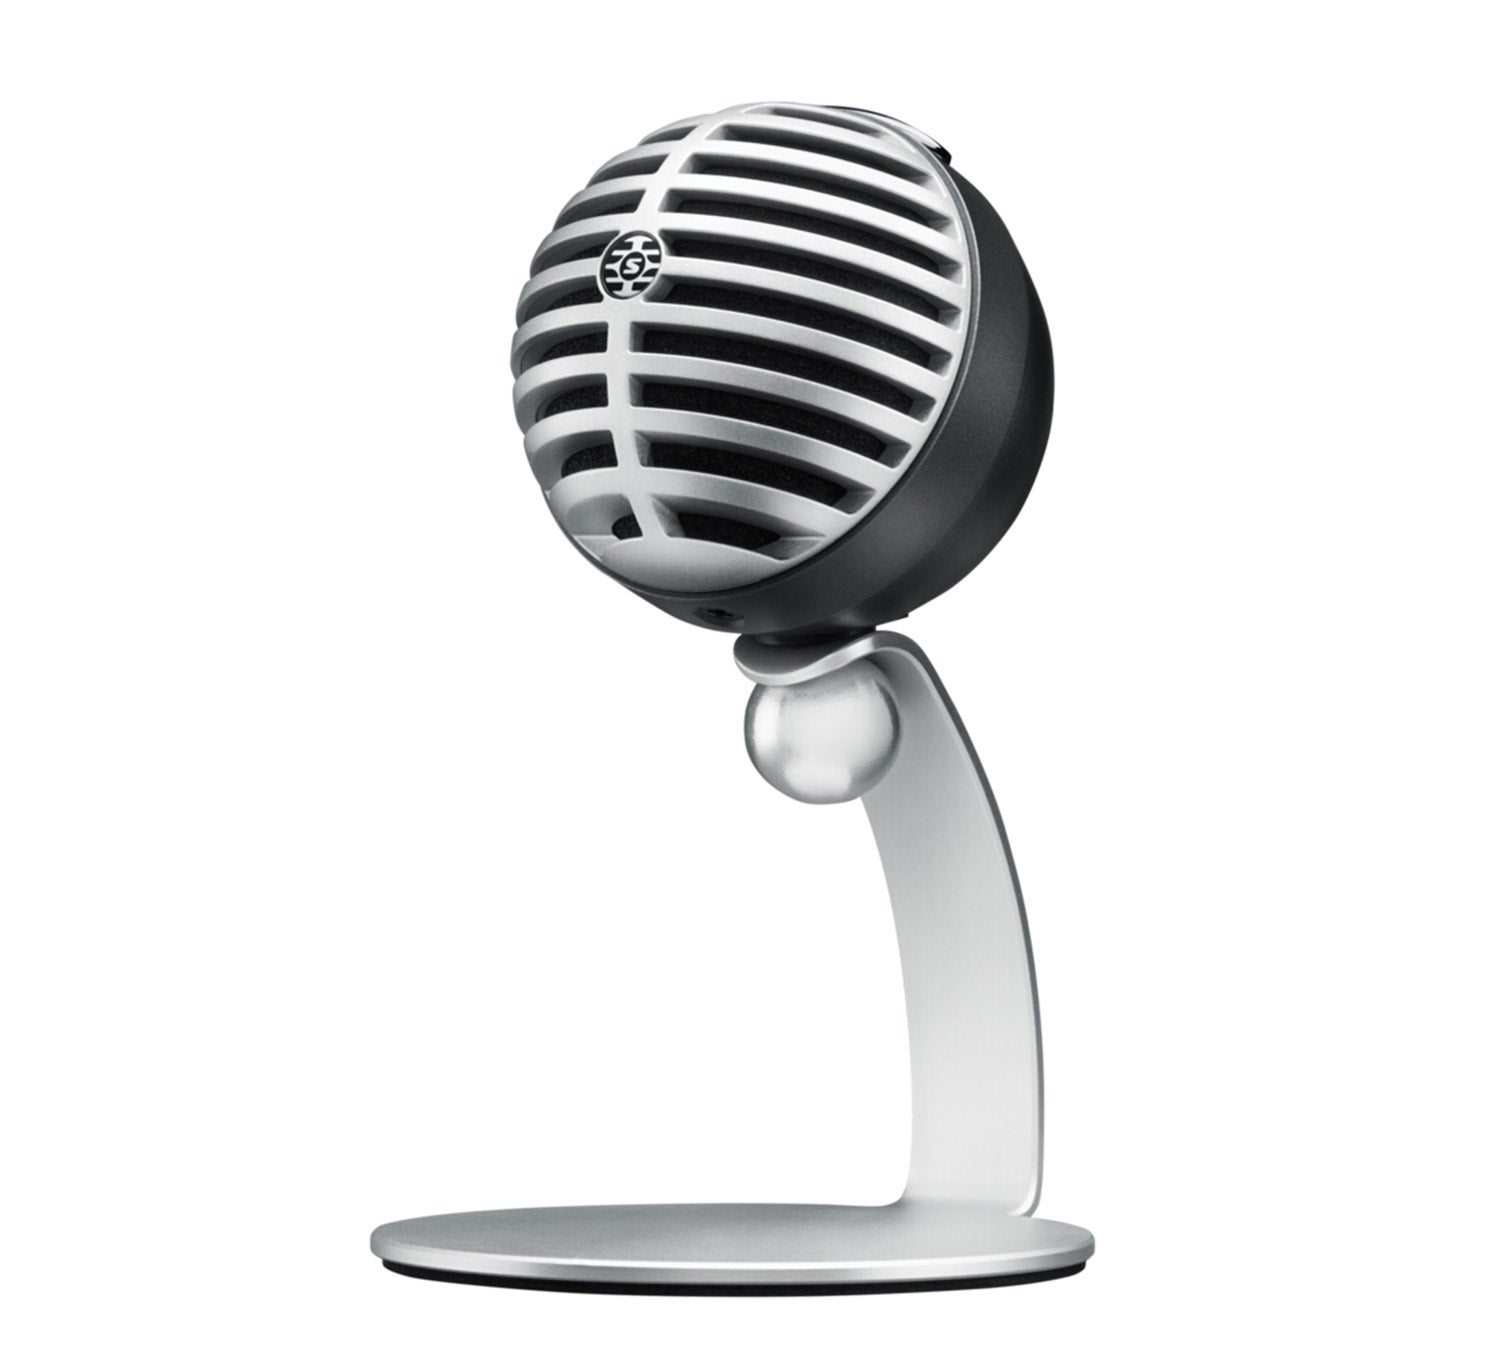 B-Stock: Shure MV5/A-LTG Digital Condenser Microphone With USB and Lighting Cable by Shure